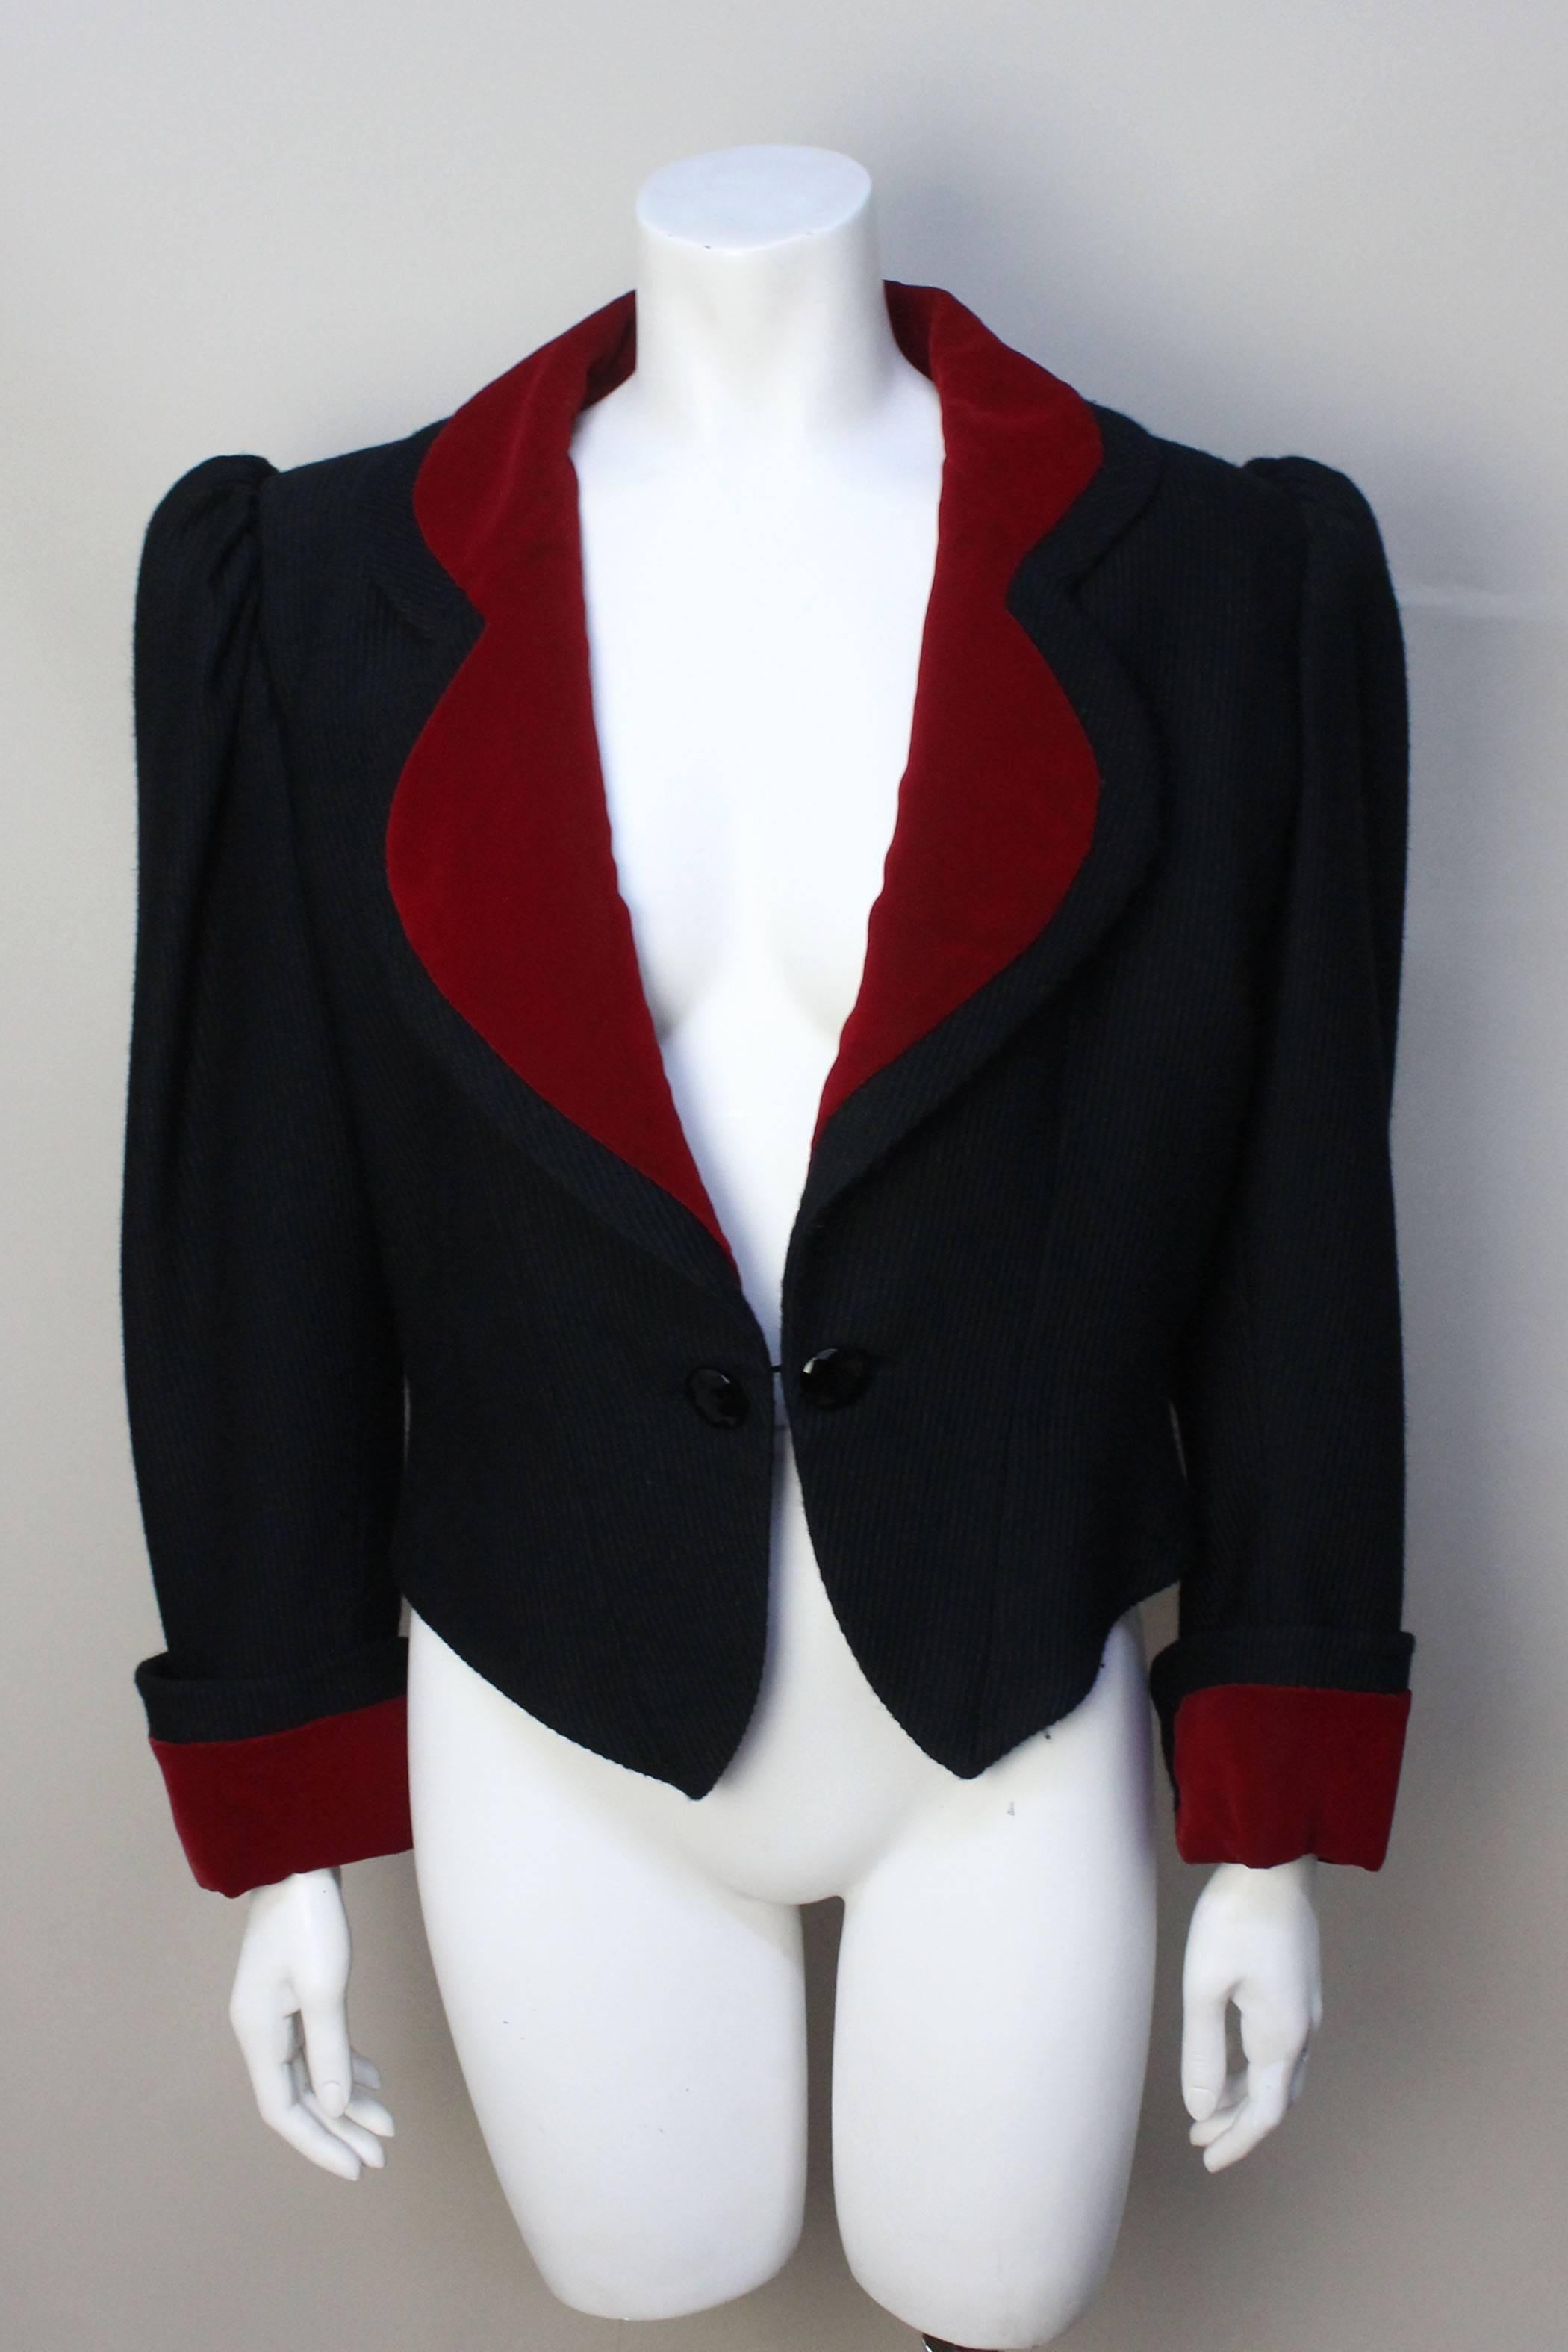 This garment is a departure from what we think of as a DVF design. She is most well known for her simple and elegant shapes especially her wrap dresses. This wool jacket has a bold design with its leg of mutton sleeve ending with a deep velvet cuff.